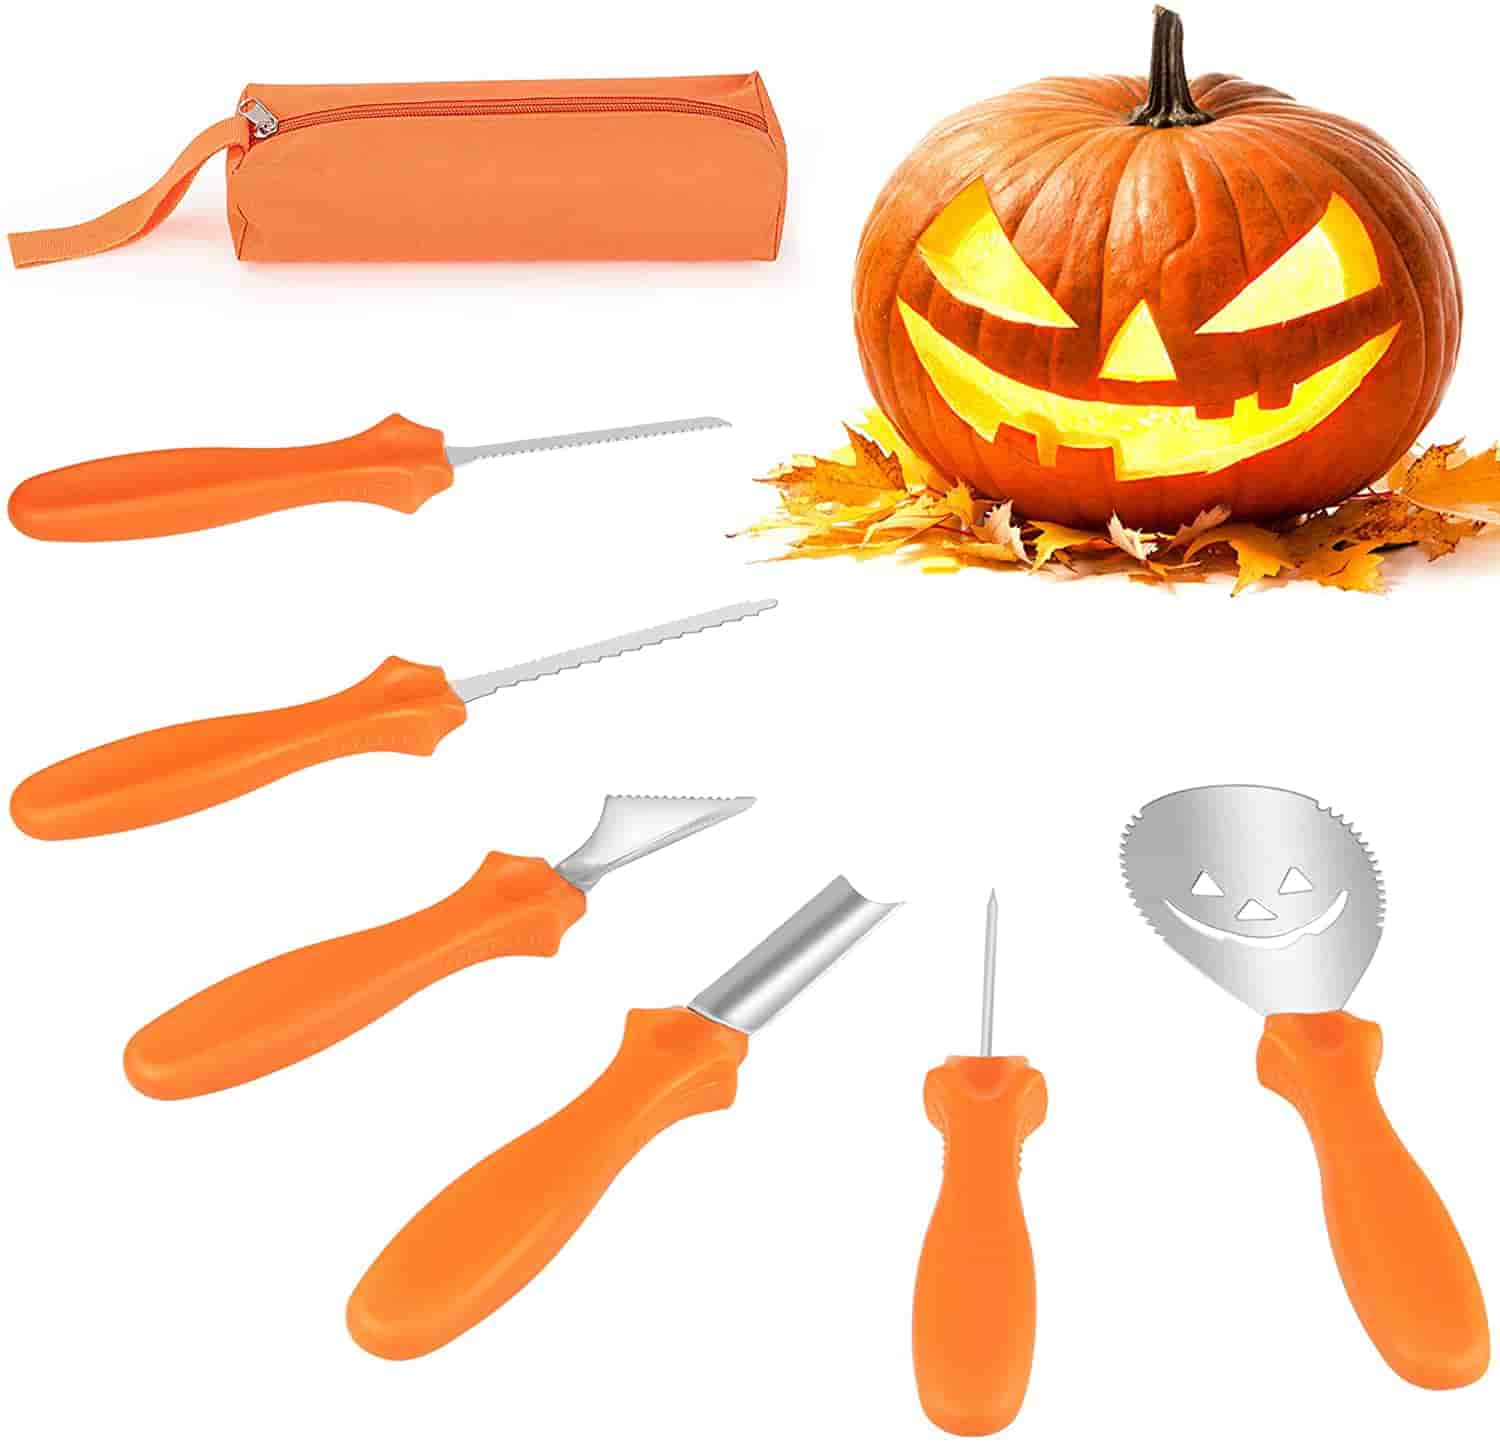 Professional Stainless Steel Pumpkin Carving Sculpting Tools Knife